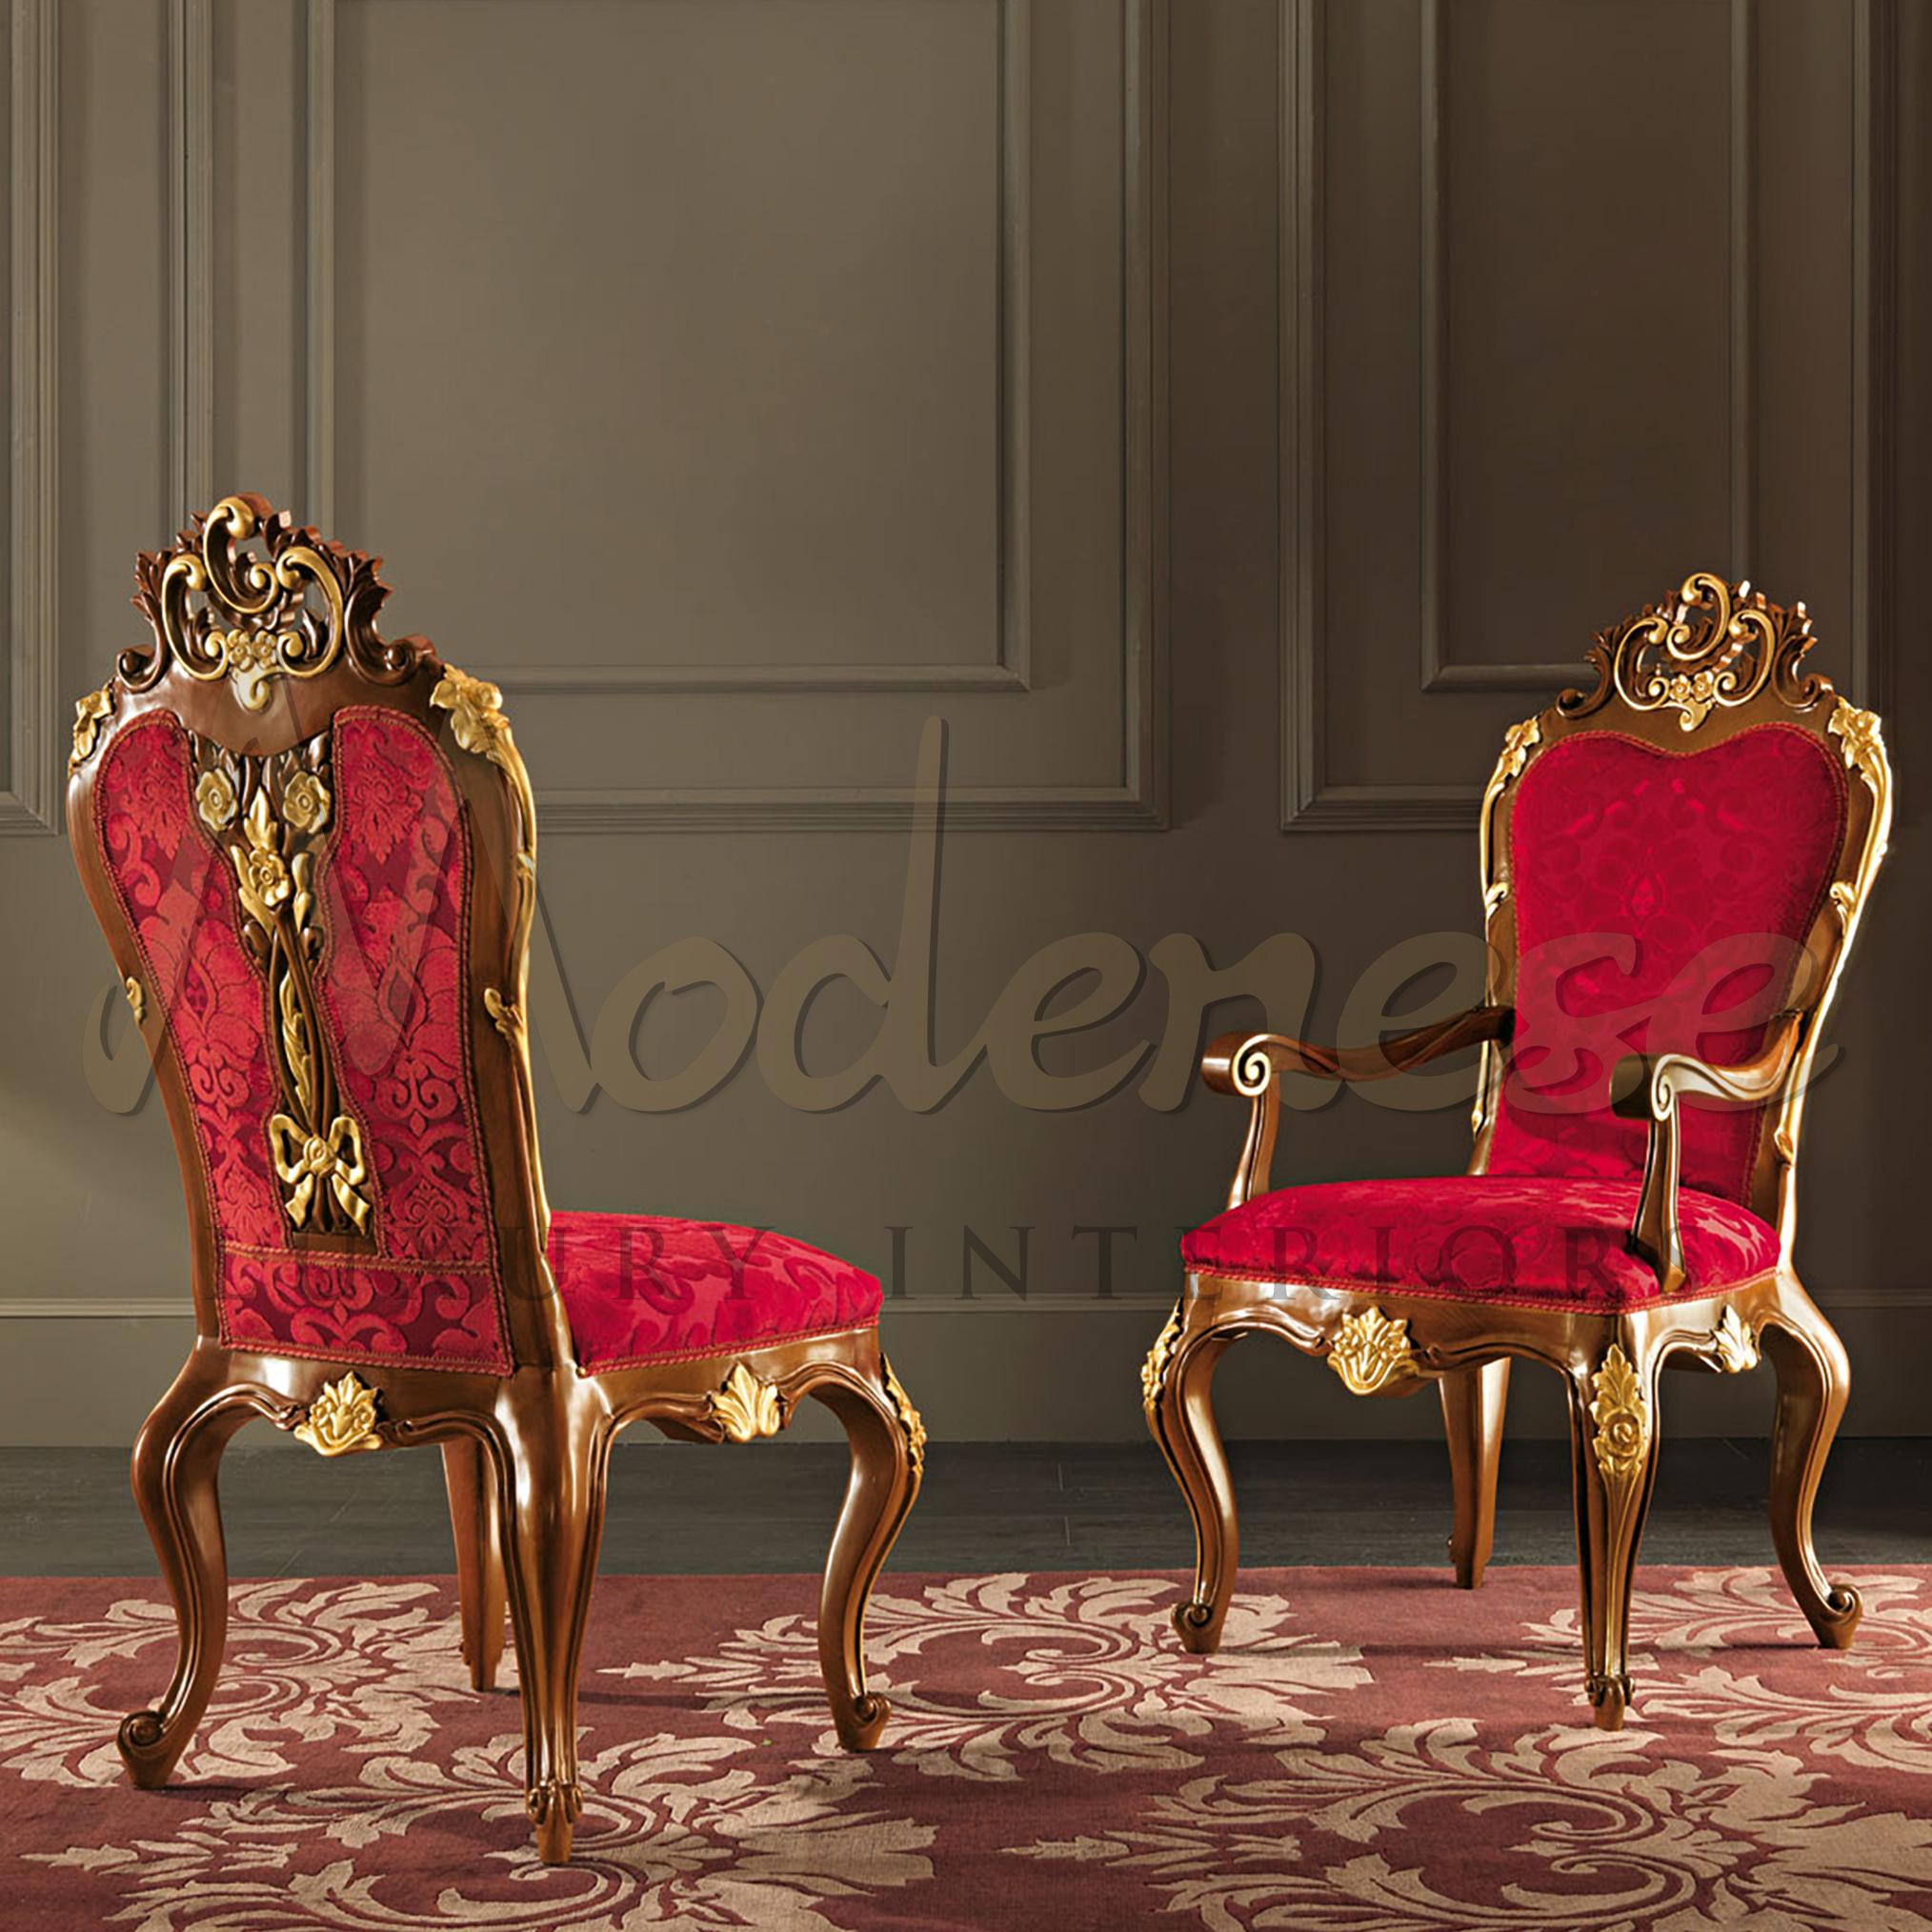 Specially designed chair with armrests by Modenese Luxury Interiors take on a true baroque style. This wonderful chair is a great head turner piece in any living space with its flamboyant red damascus upholstery being highlighted by the solid walnut